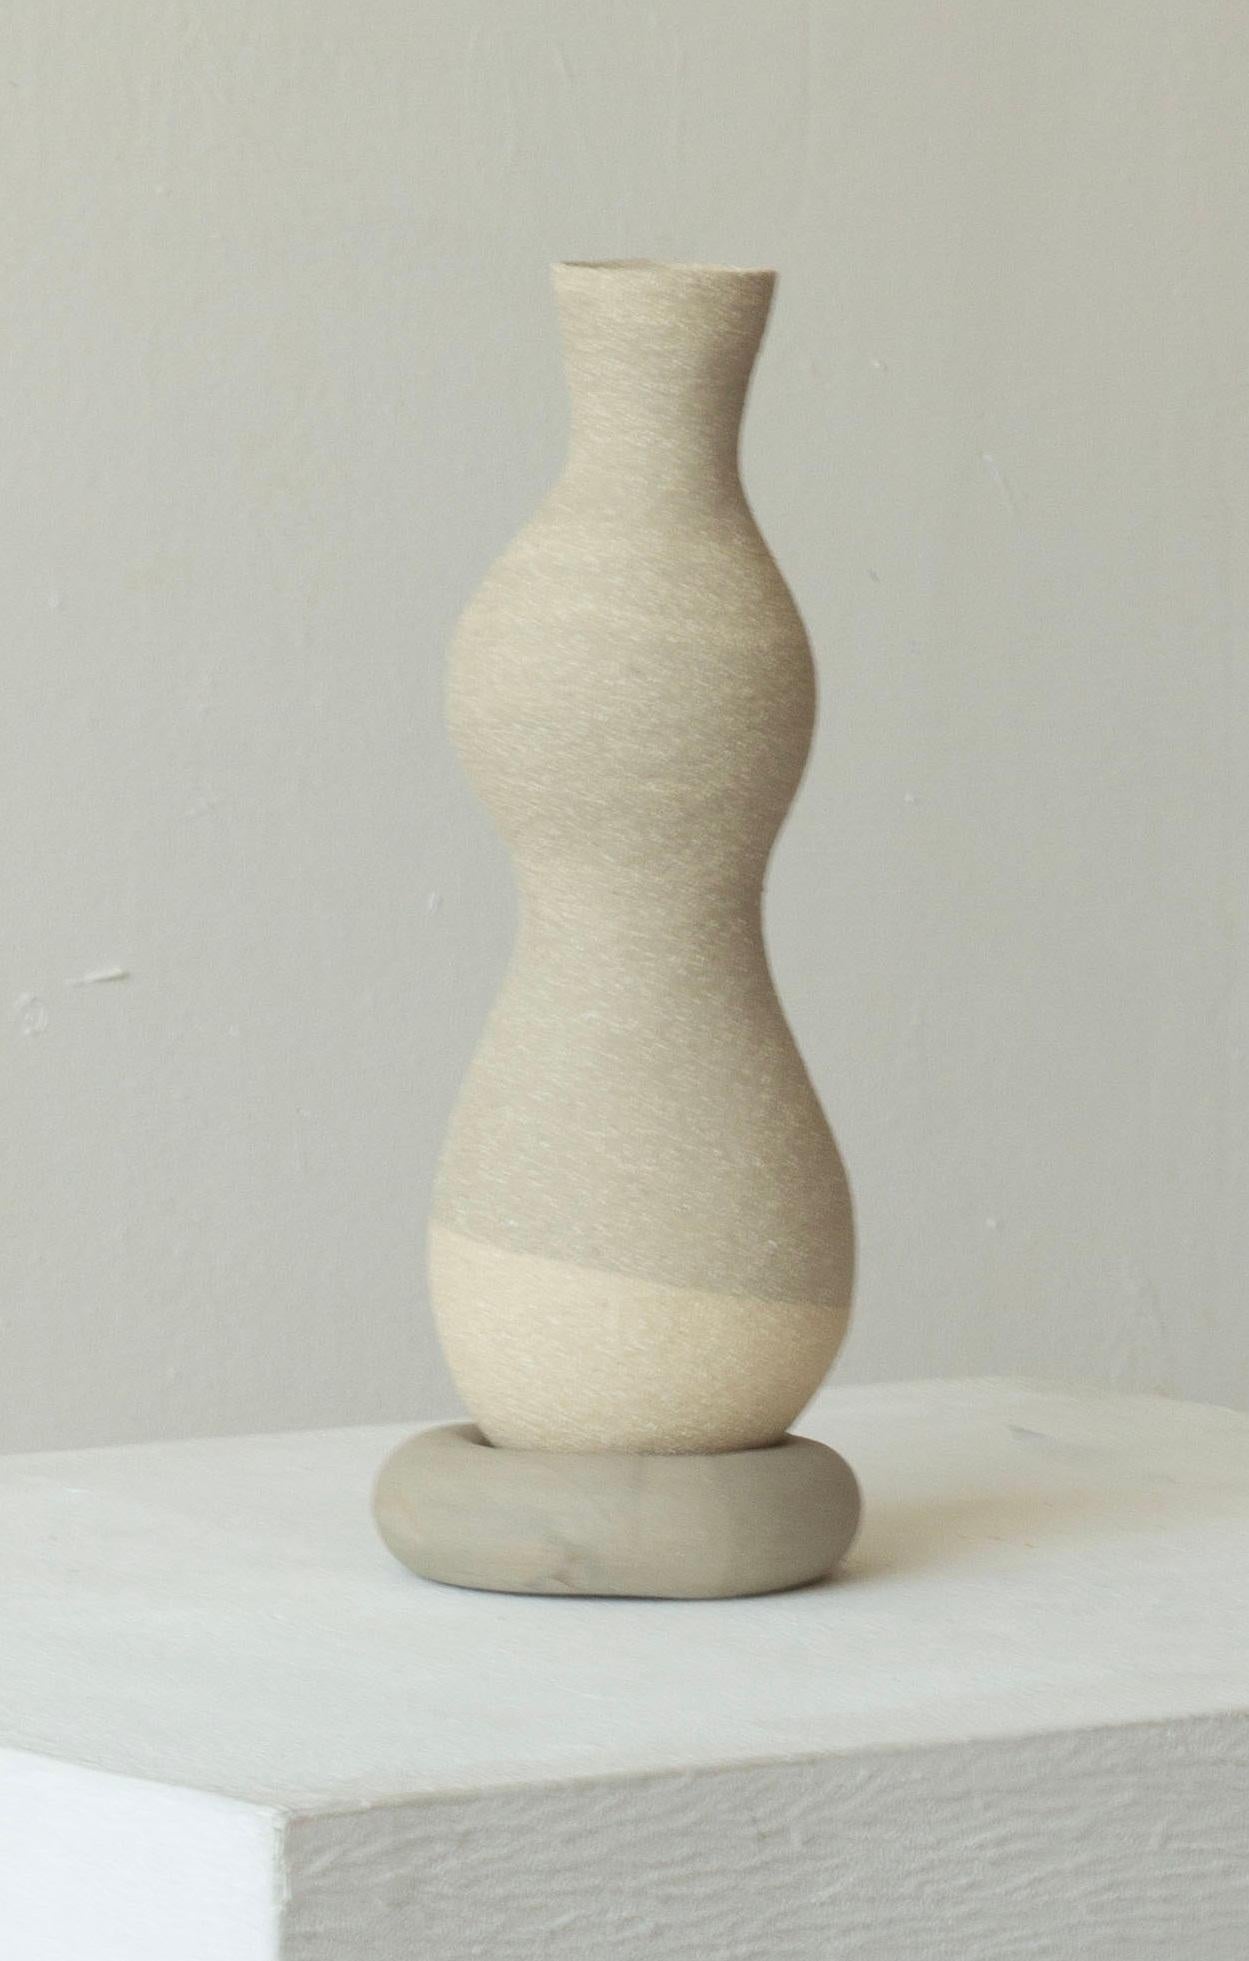 Woman 219 Vase by Karina Smagulova
One of a Kind.
Dimensions: Ø 8 x H 24 cm.
Materials: Grey stoneware.
​
With an Armenian and Kazakhstan heritage, Karina Smagulova was born in Greece in 1995 and graduated with a diploma in Architecture from